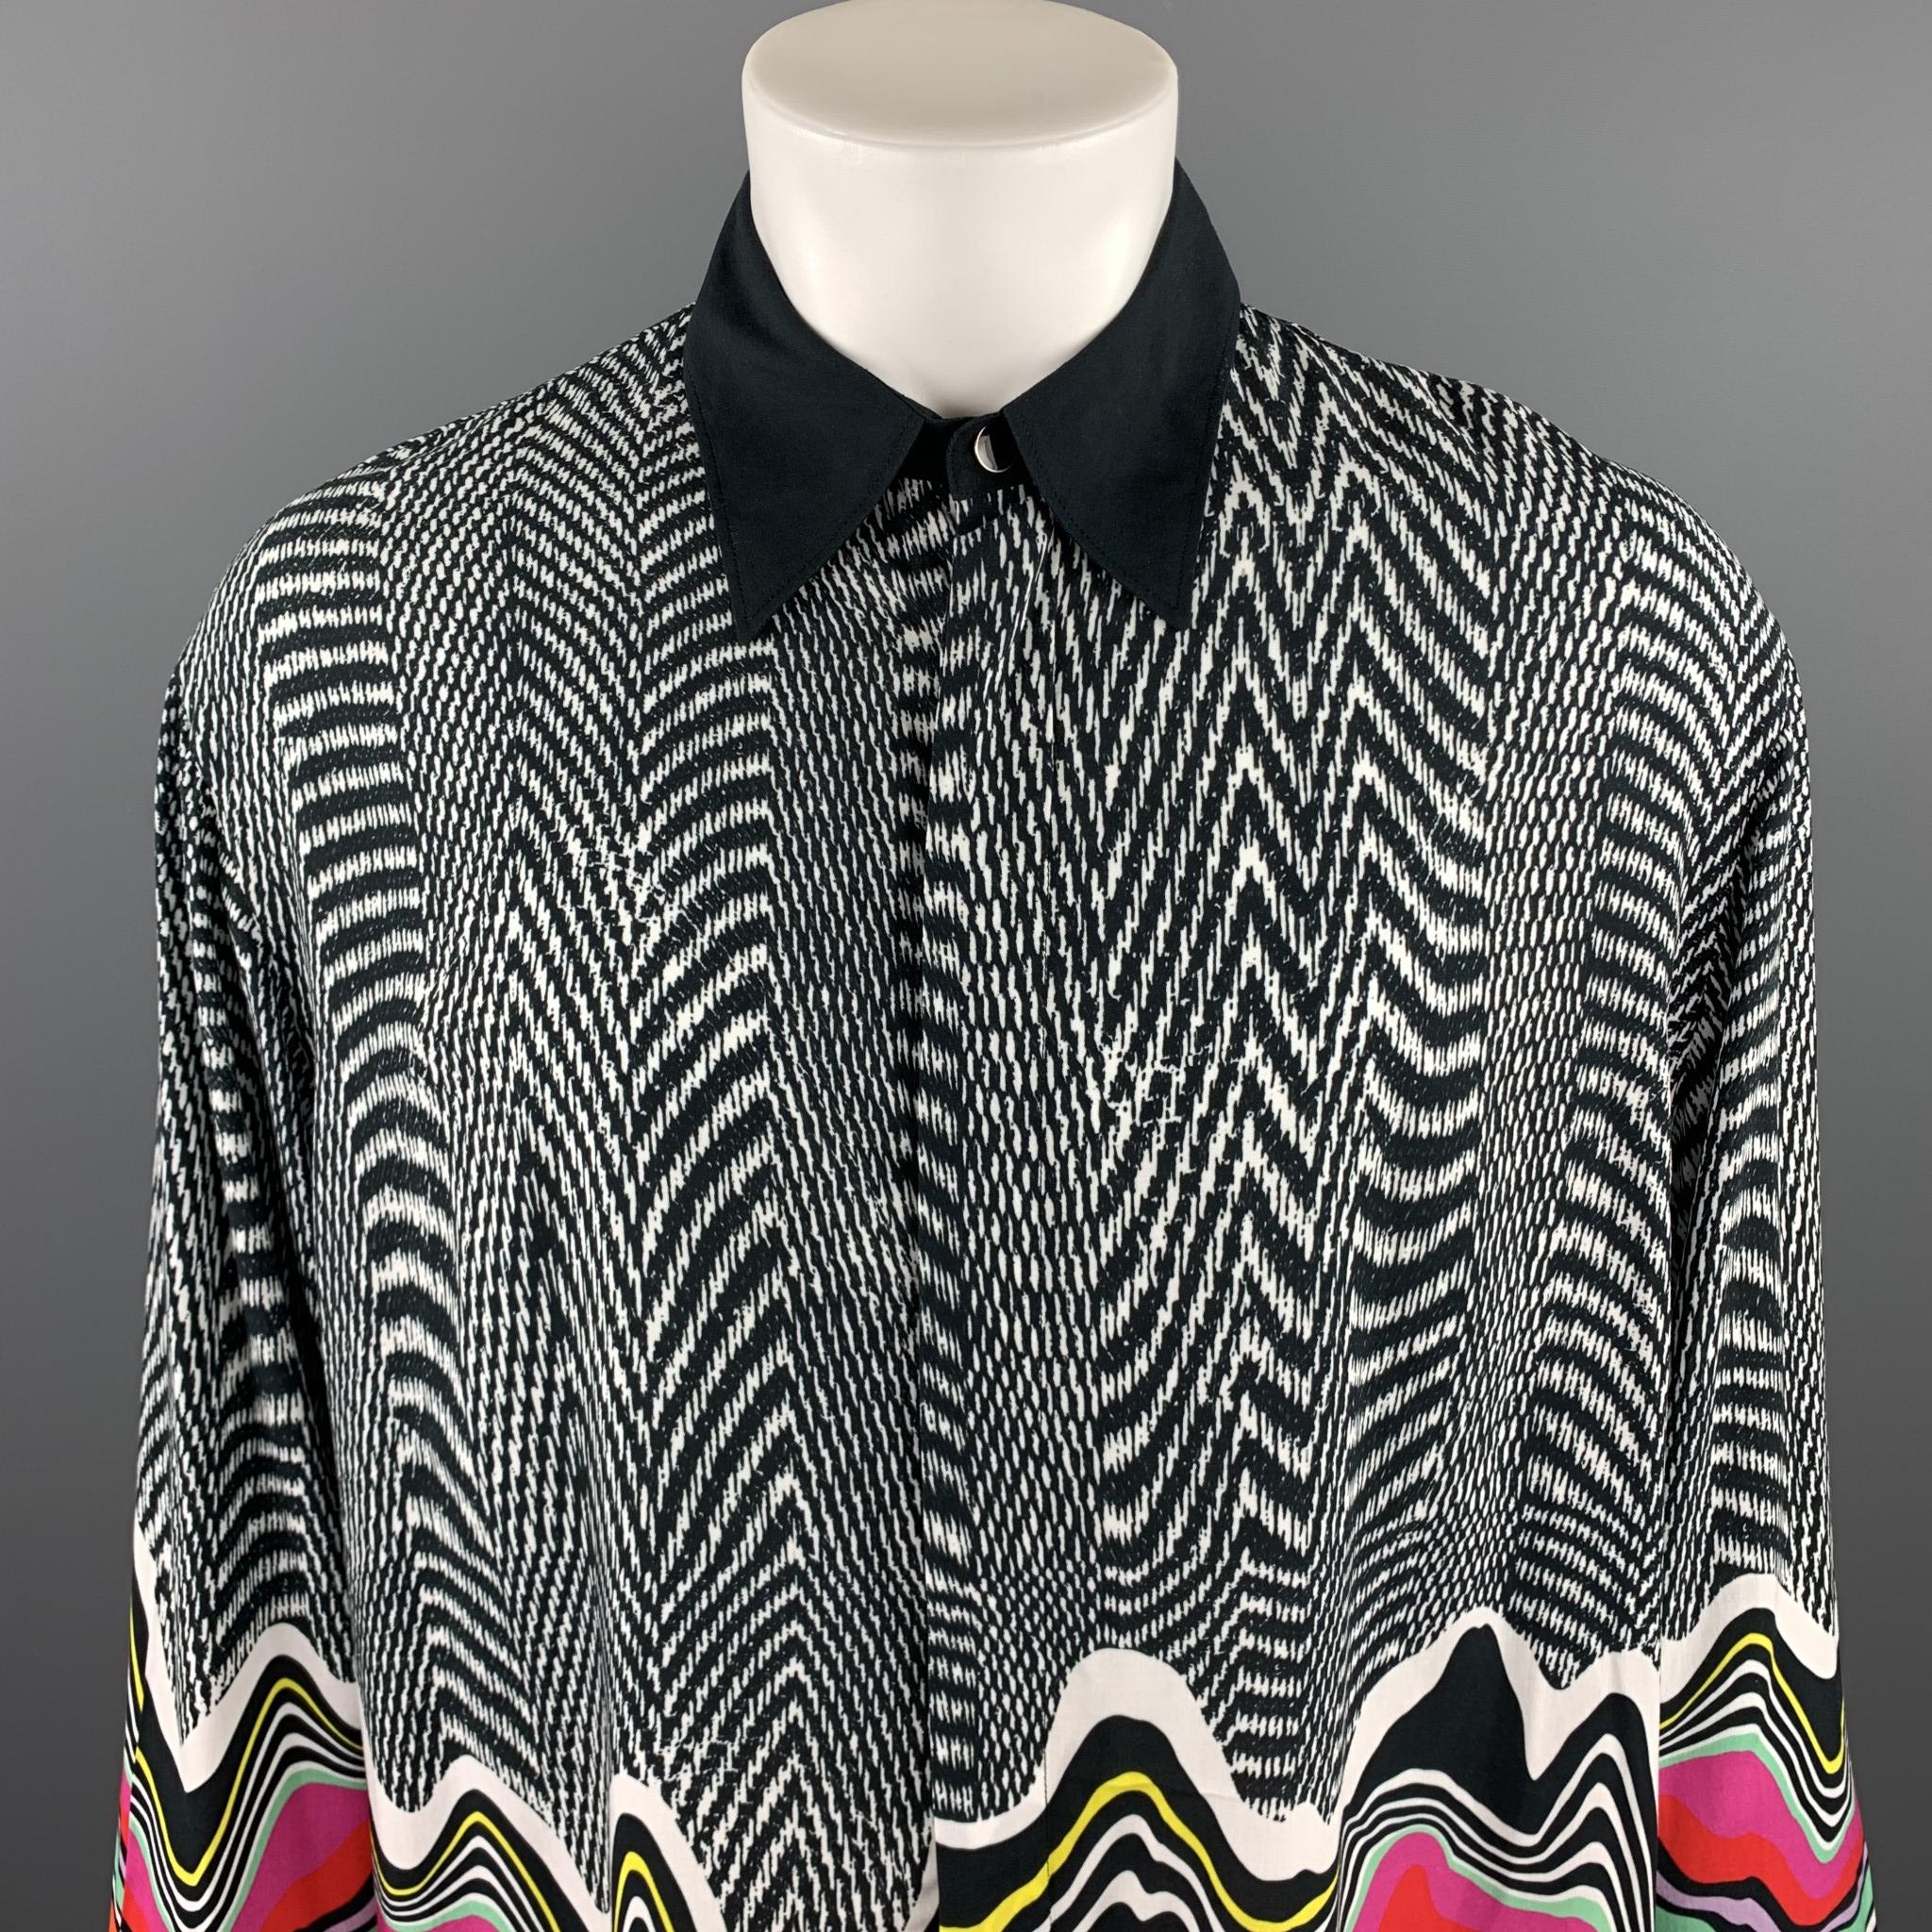 JUST CAVALLI long sleeve shirt comes in a black & white viscose with a multi-color abstract design featuring a oversized button up style, spread collar, and a hidden button closure. Made in Italy.

New With Tags. 
Marked: IT